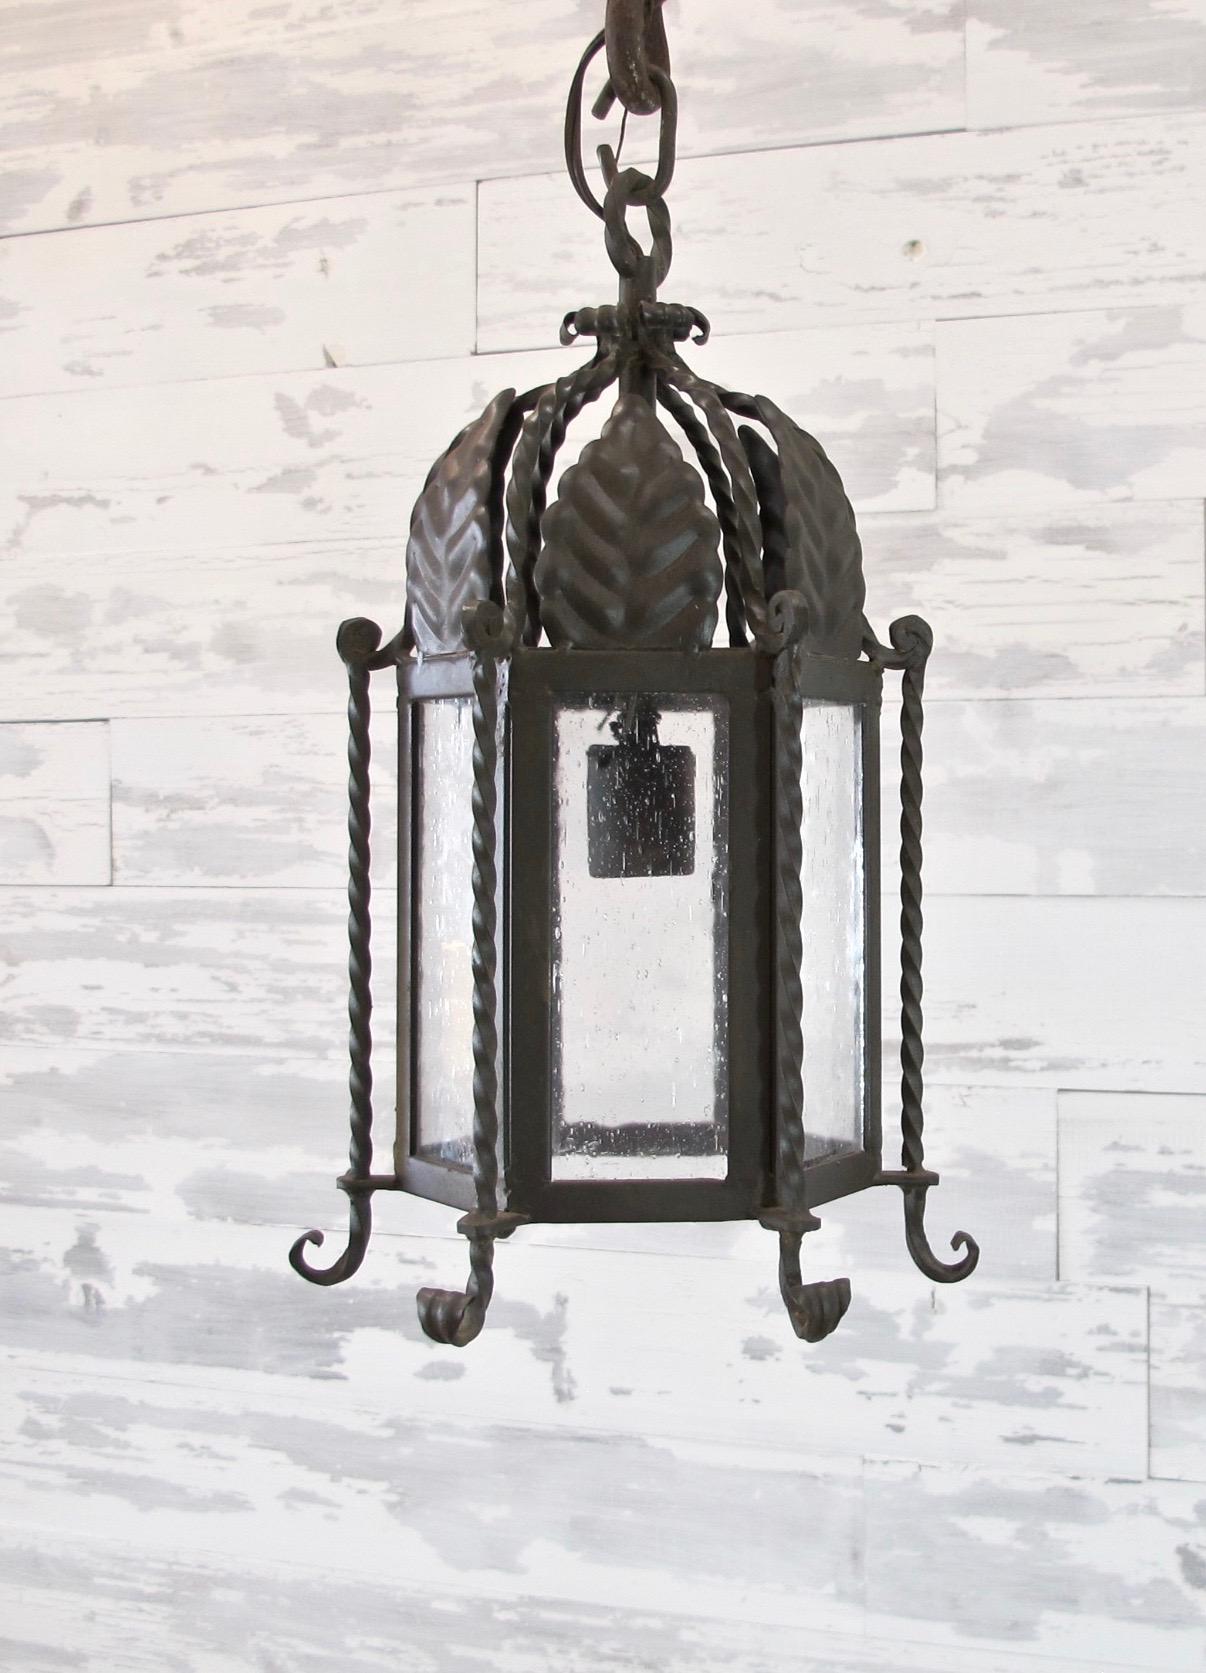 Pair of small forged iron lantern with leaf motif. Iron with seeded glass in antique bronze finish. Scroll details on the bottom. Each has a single medium base bulb up to 60 watts. Wiring is UL listed, chain and canopy included. Measures: 12